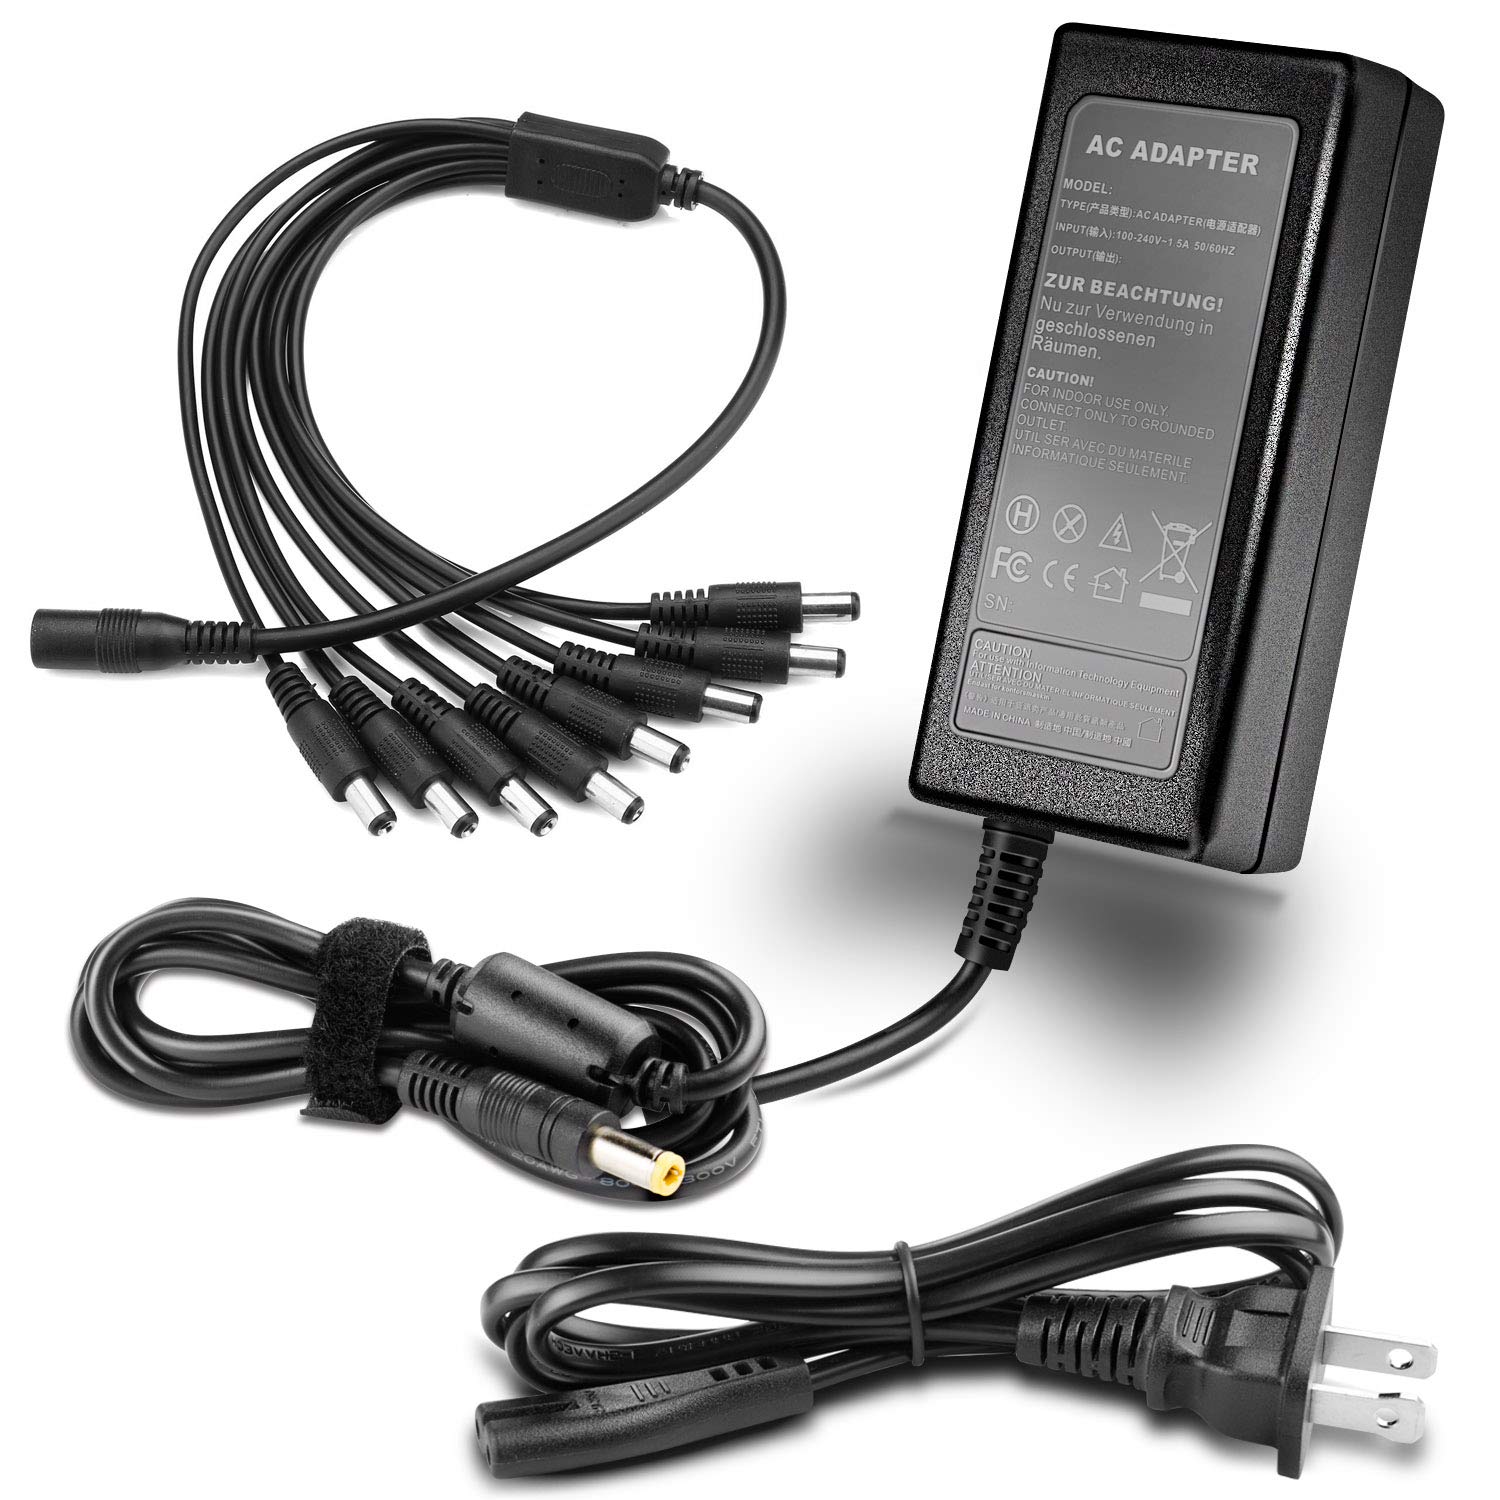 LED AC Adapter AC 100-240V to DC 12V 5A Power Supply — Bar Products